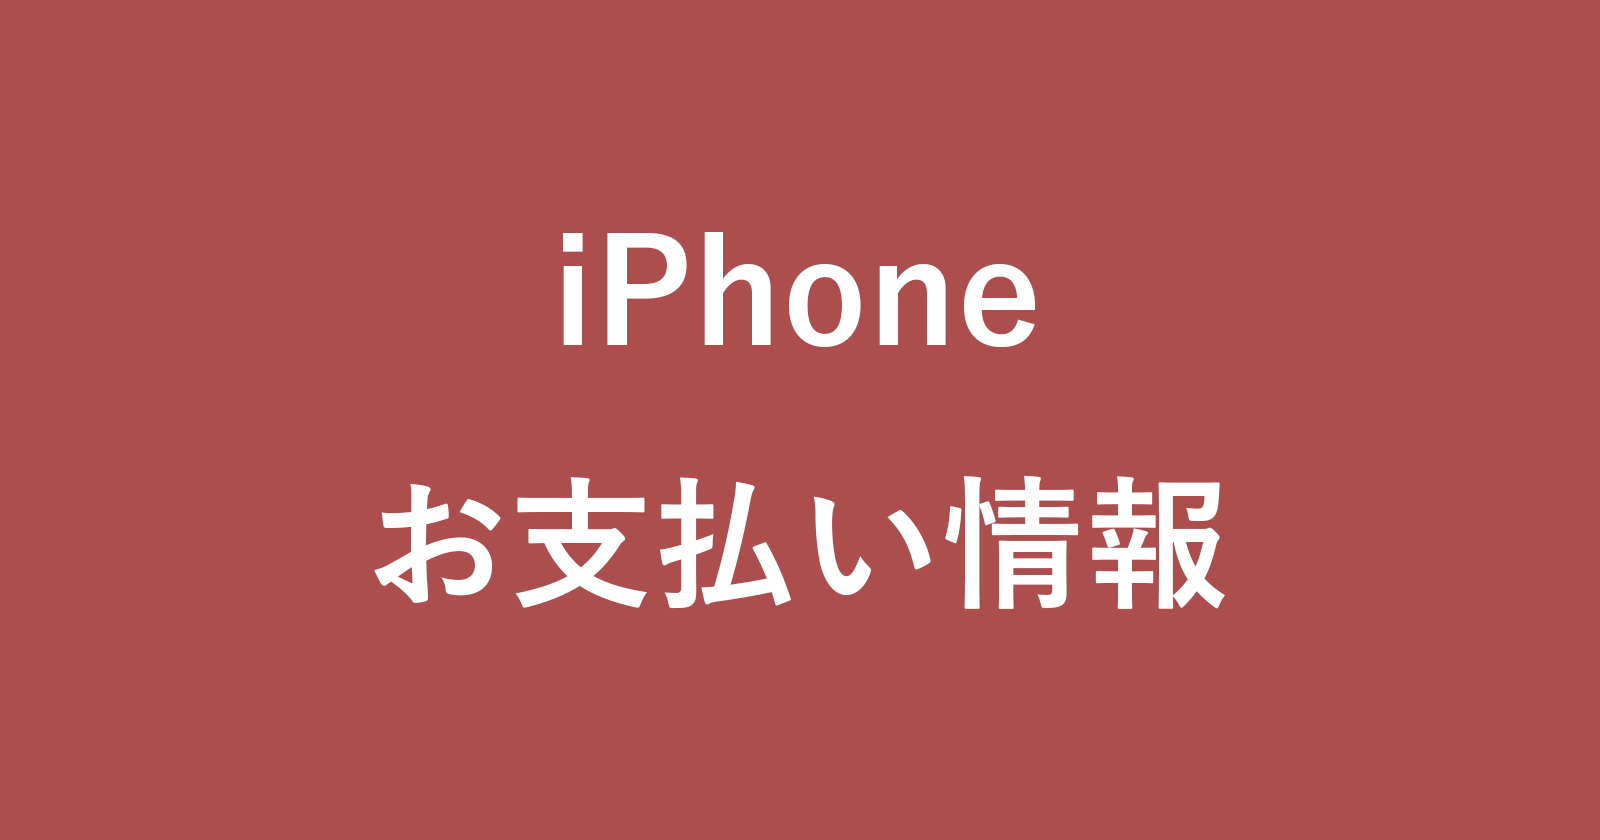 iphone payment